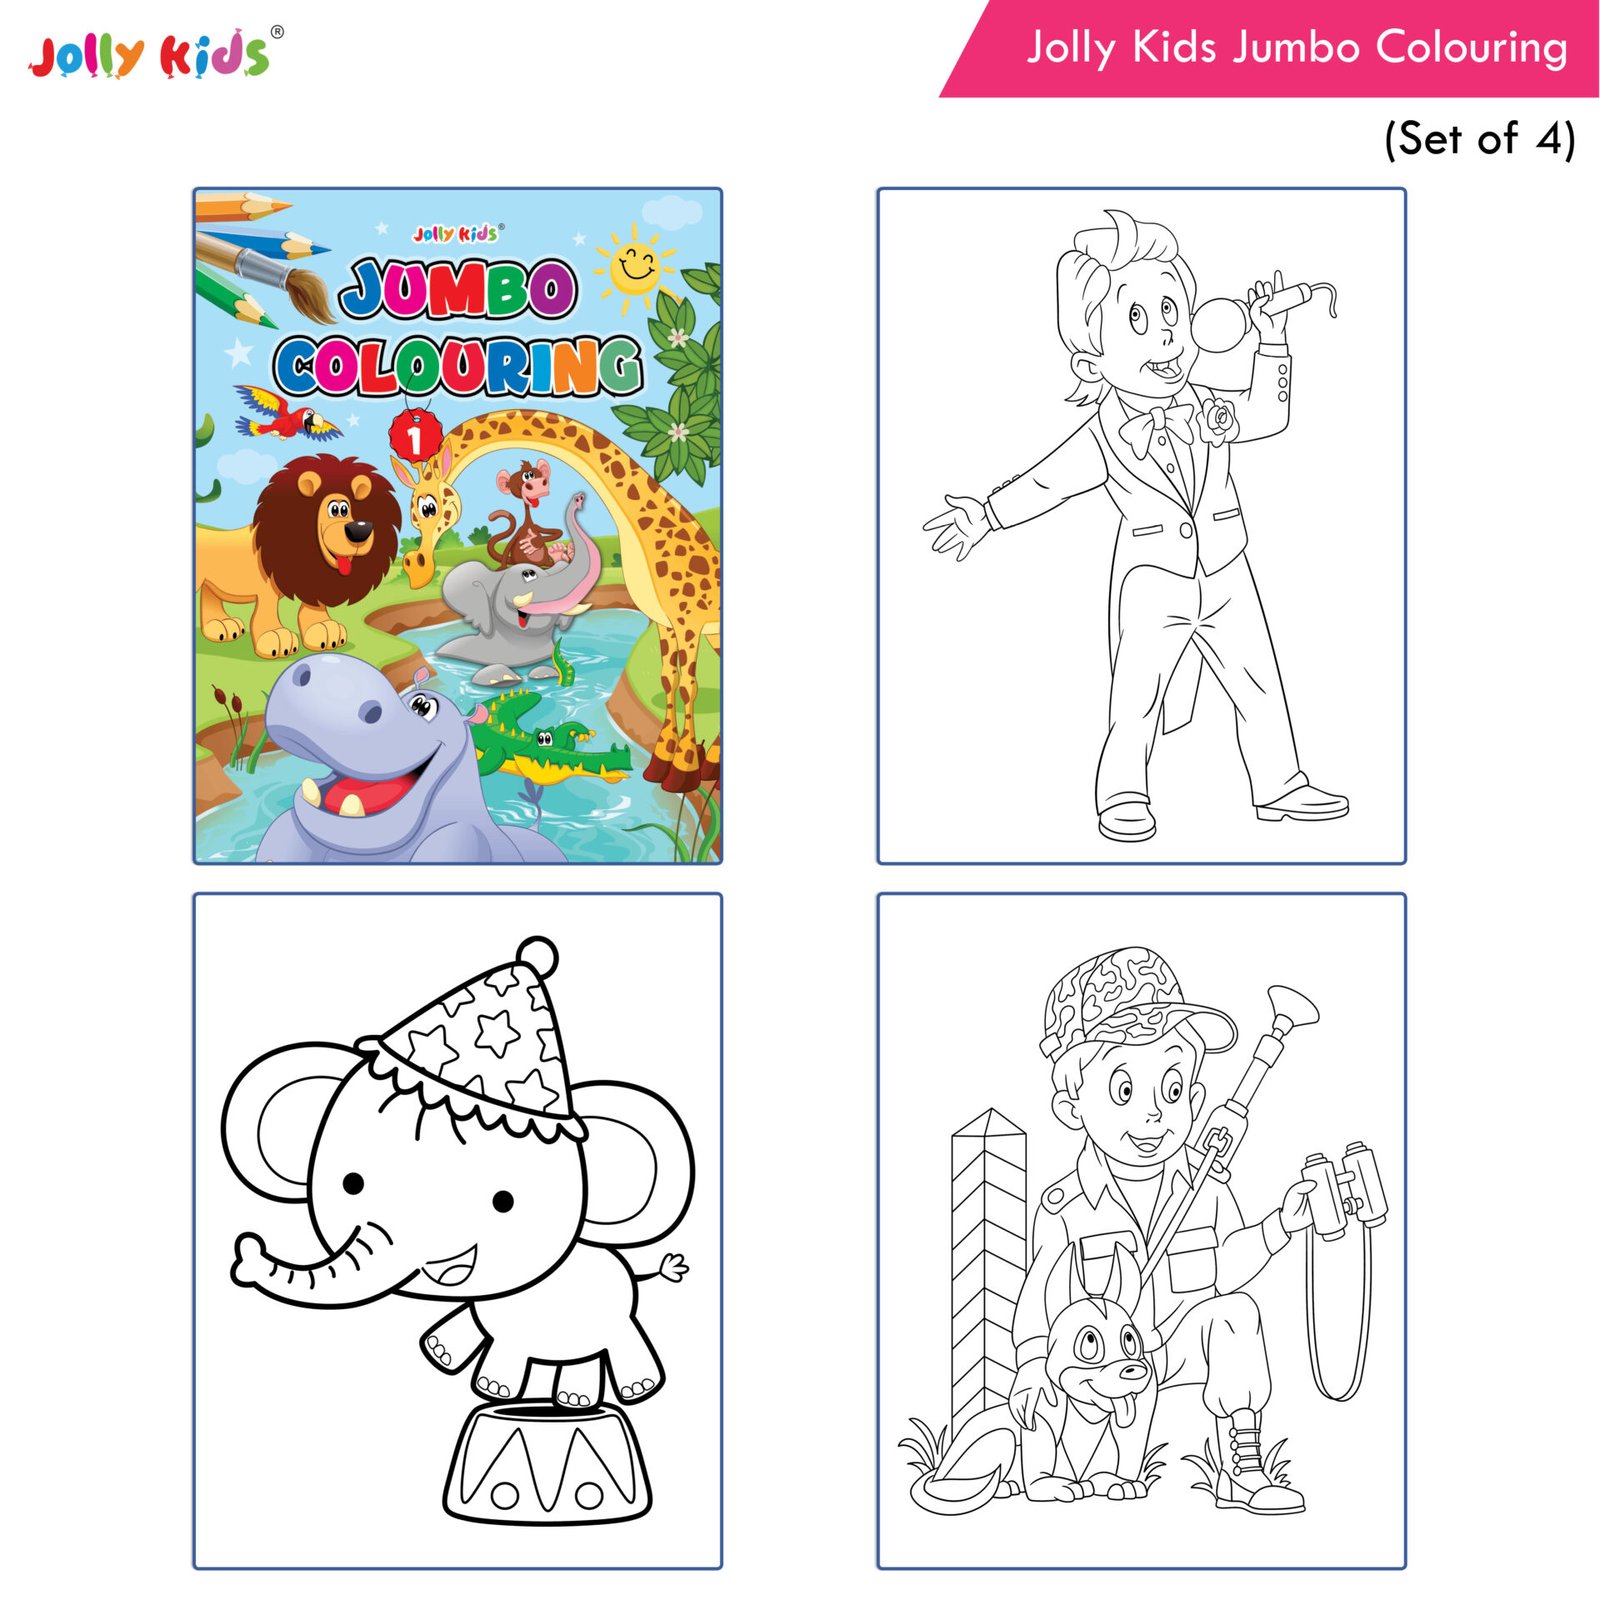 My Drawing Book, Coloring Book For Kids: Kids Coloring Books Ages 4-8,  Animal Coloring and Sketch Book for Kids, Great G 